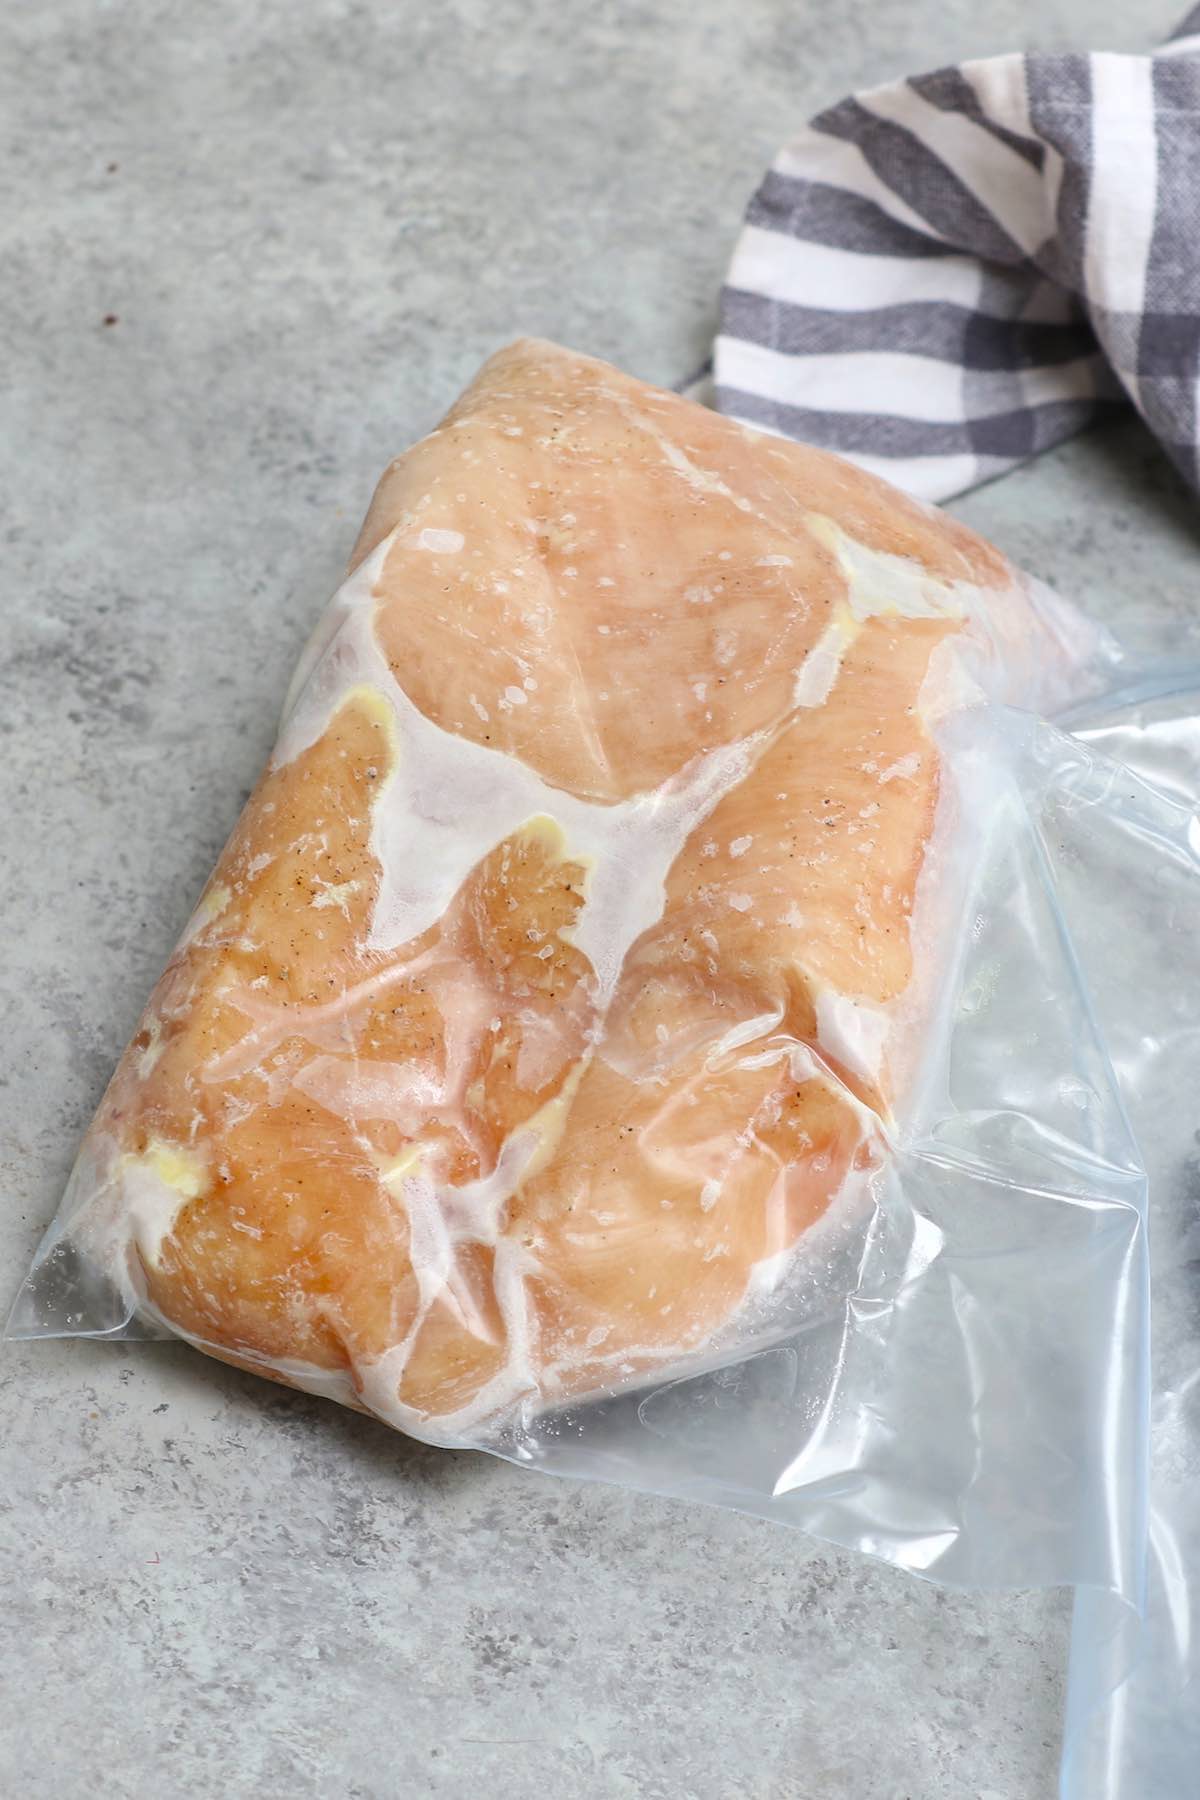 Sous Vide Frozen Chicken Breast is one of the best features of a sous vide machine. It’s easy, convenient, healthy and turn out so well EVERY TIME! I never take the time to thaw chicken again after I discovered this method. #SousVideChickenBreast #SousVideFrozenChickenBreast